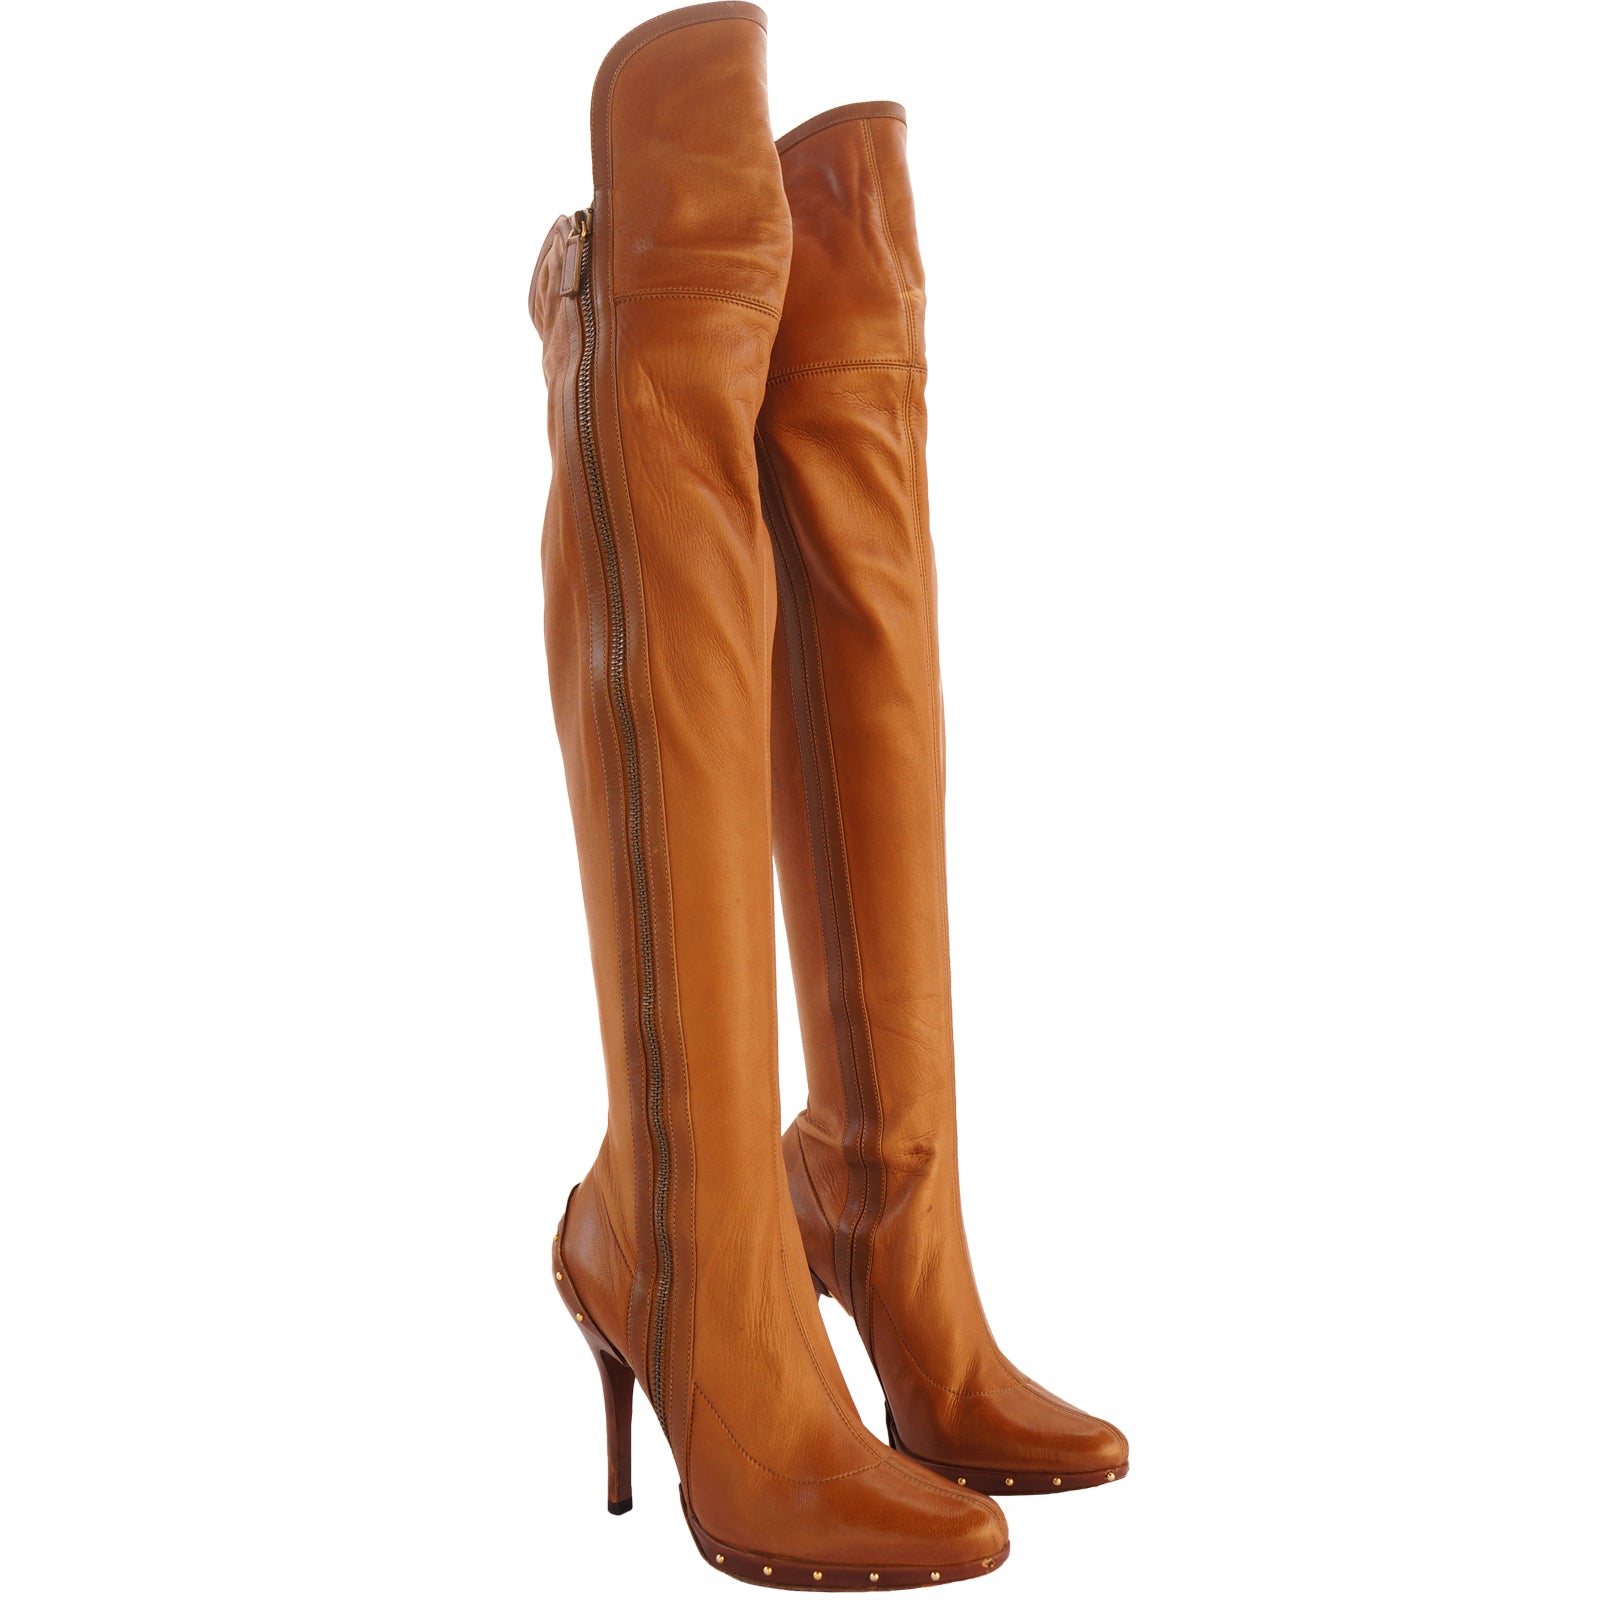 GUCCI TOM FORD ERA OVER THE KNEE BOOTS - leefluxury.com